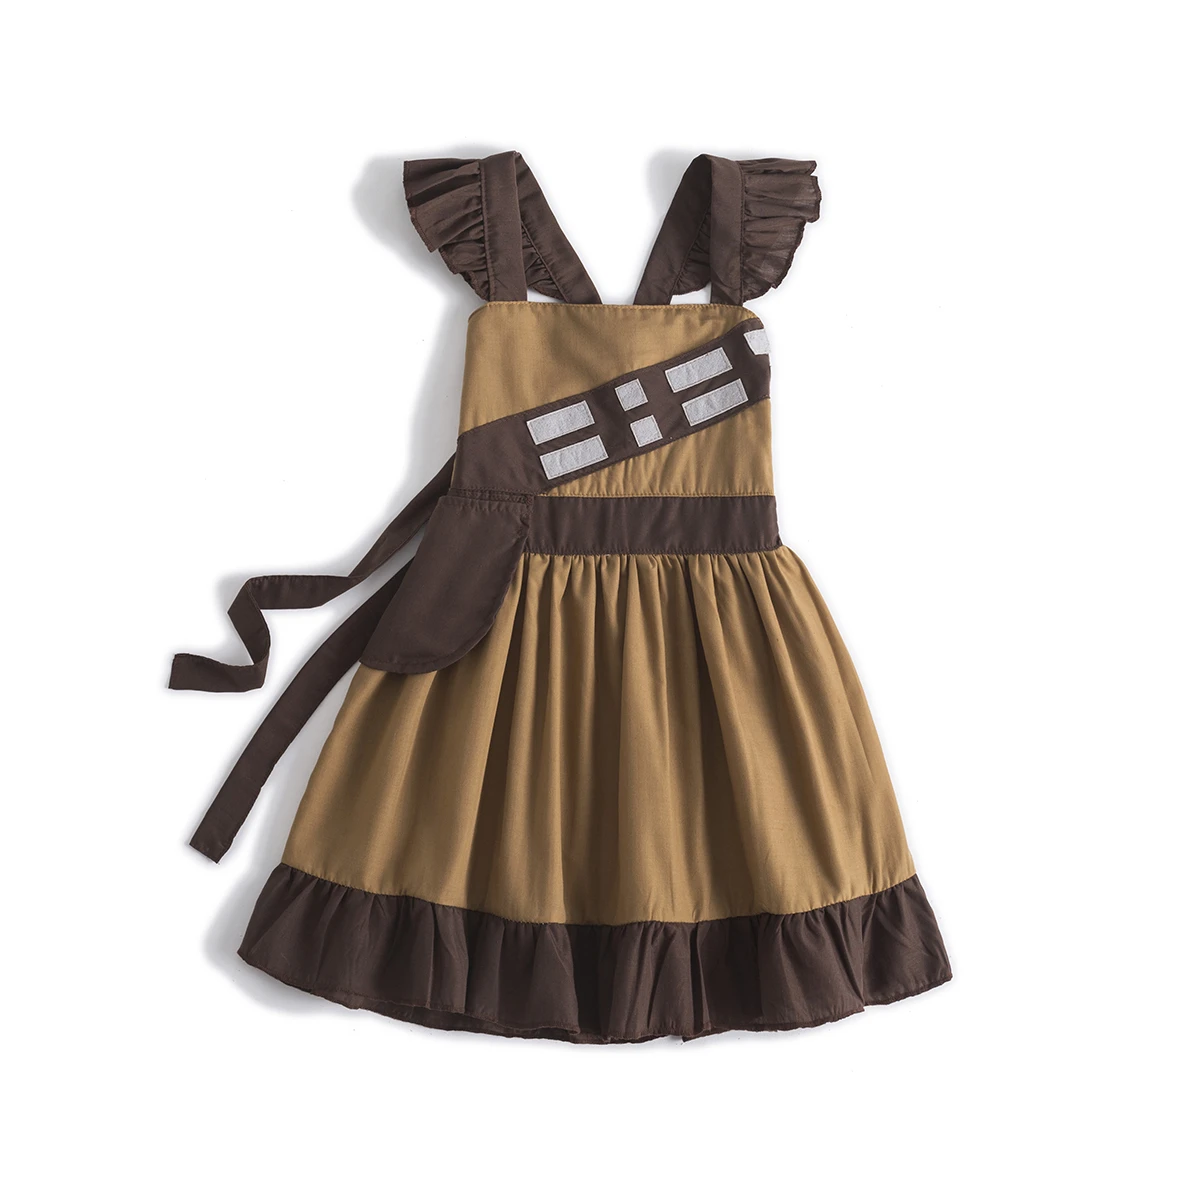 princess dress for girls toy story costume fairy dress toy story 2 dresses chewcabba bb8 bb-8 leia rey christmas halloween matching family easter outfits